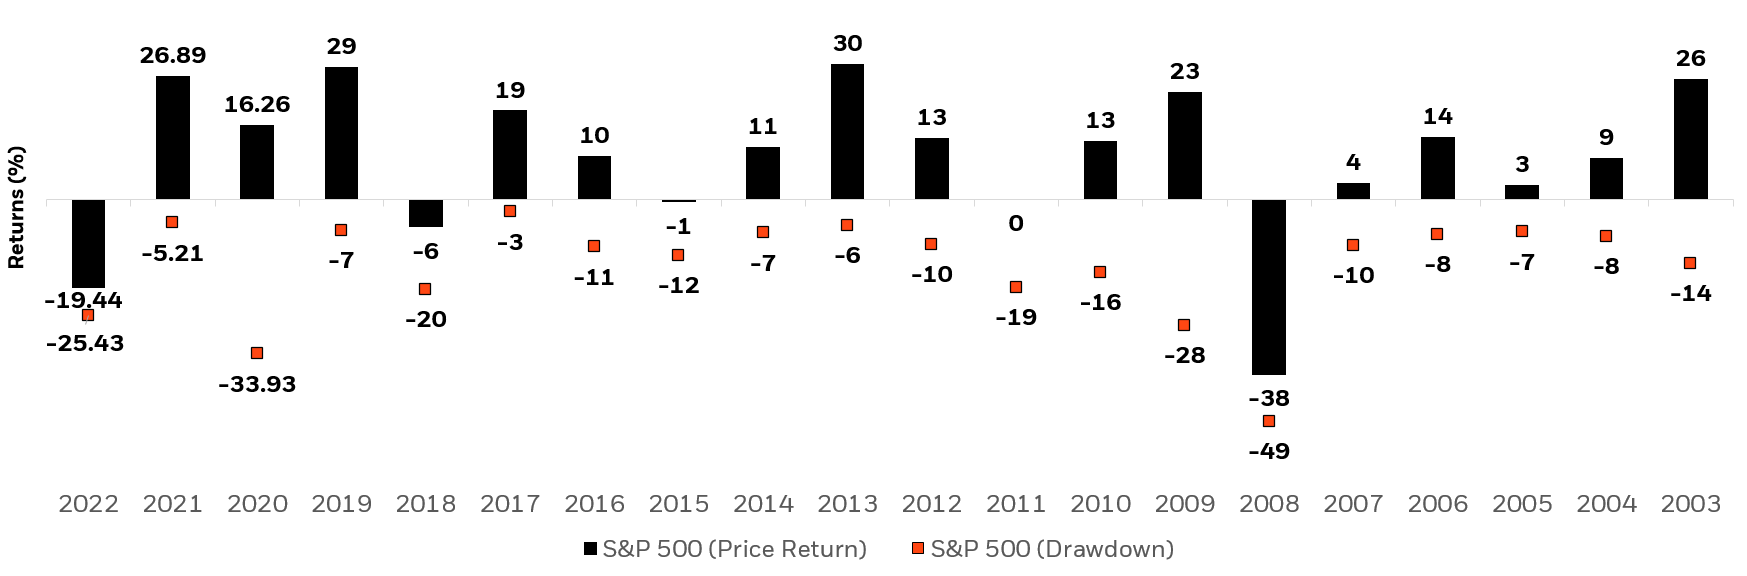 Bar chart showing the S&P 500 Index’s annual performance as well as its intra-year declines.